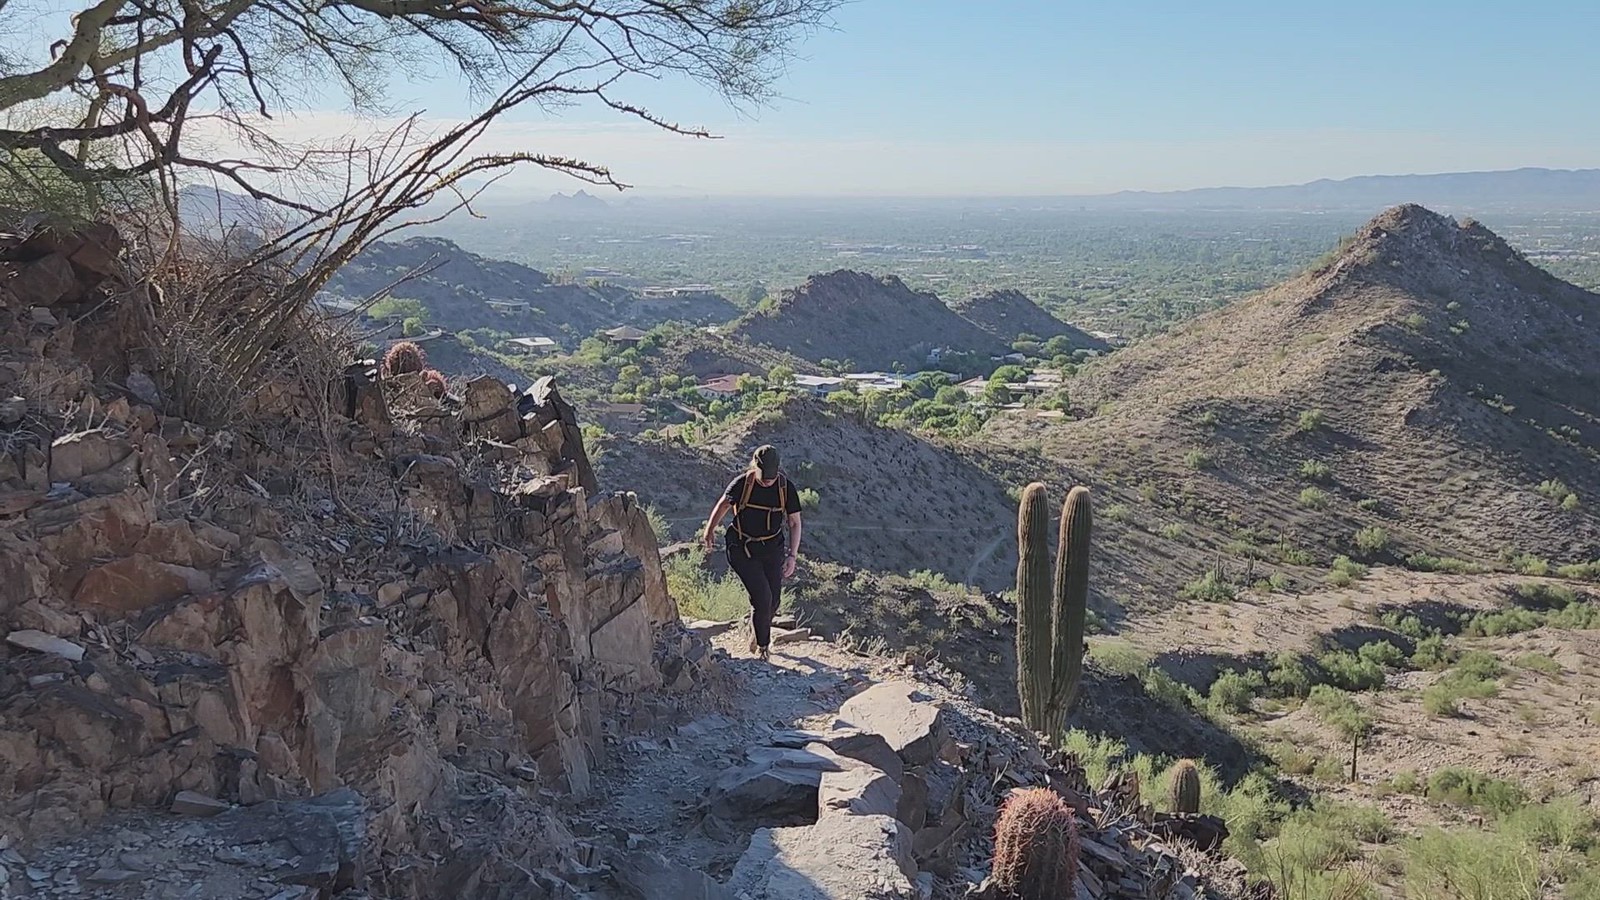 A female guest navigates a rocky trail surrounded by a scenic backdrop during one of the Phoenix hiking tours from the Wild Bunch Desert Guides.